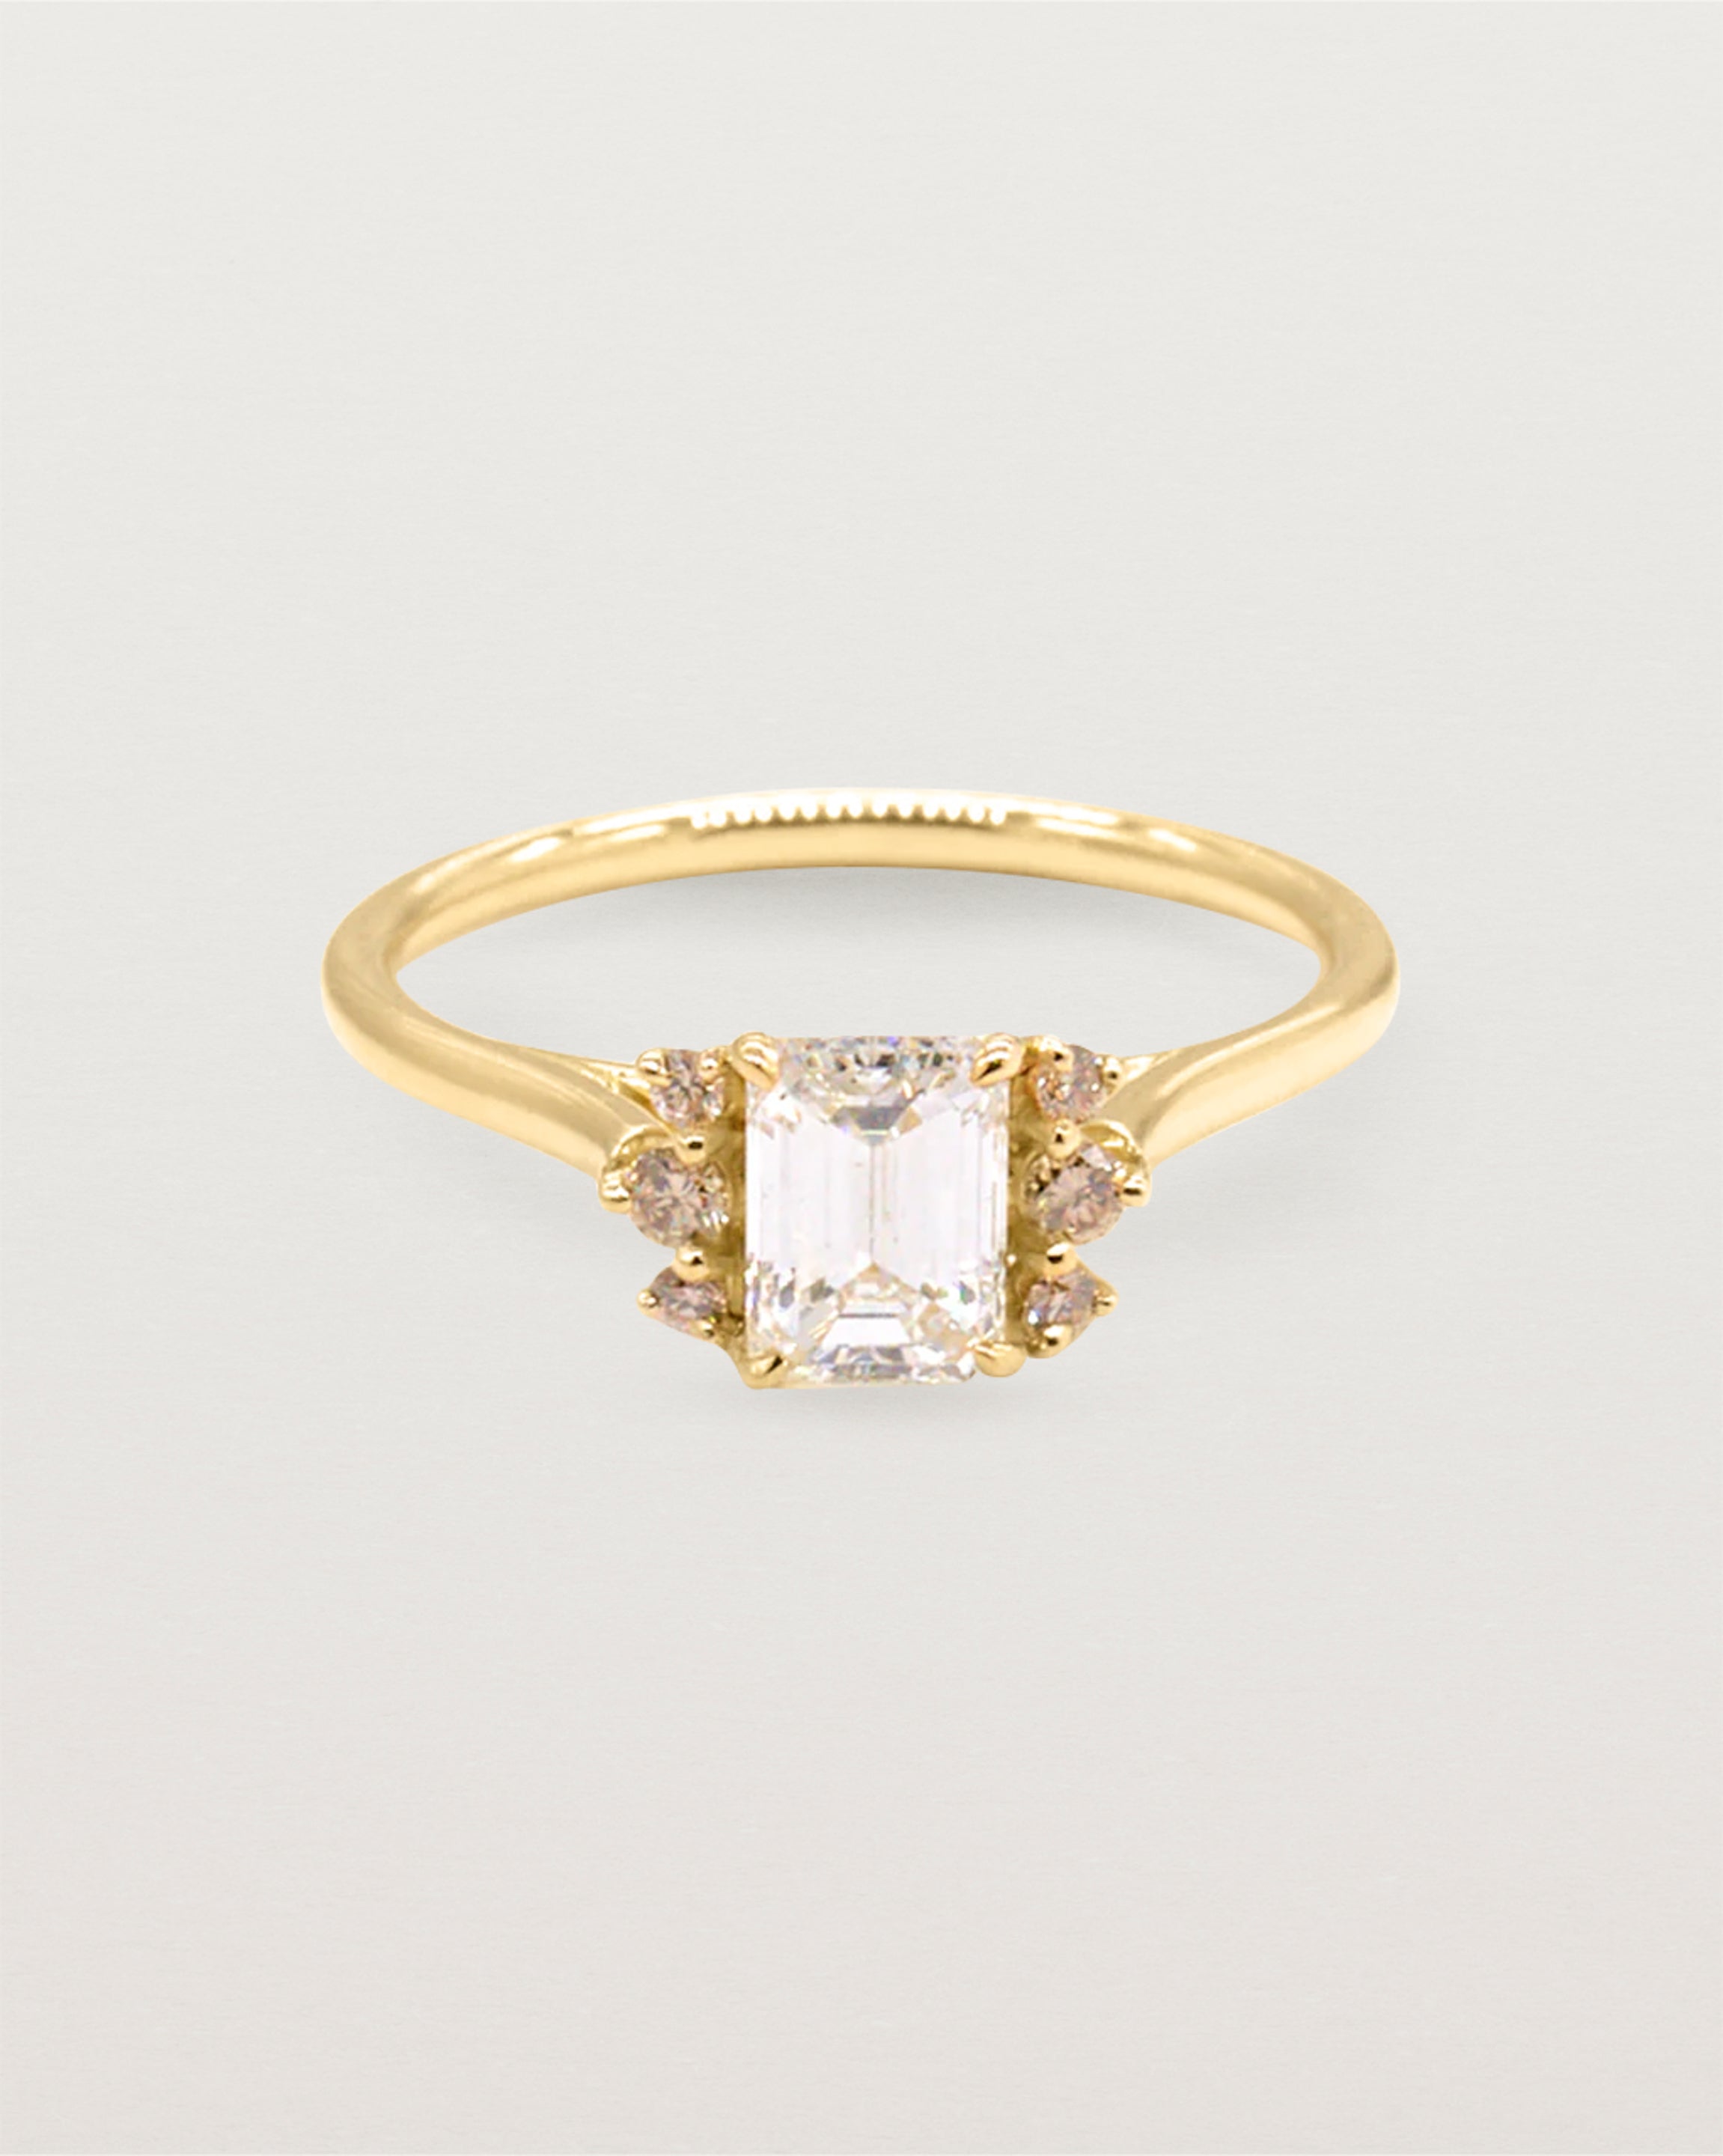 A emerald cut white diamond is shouldered by sparkling champagne diamonds and crafted in yellow gold. 